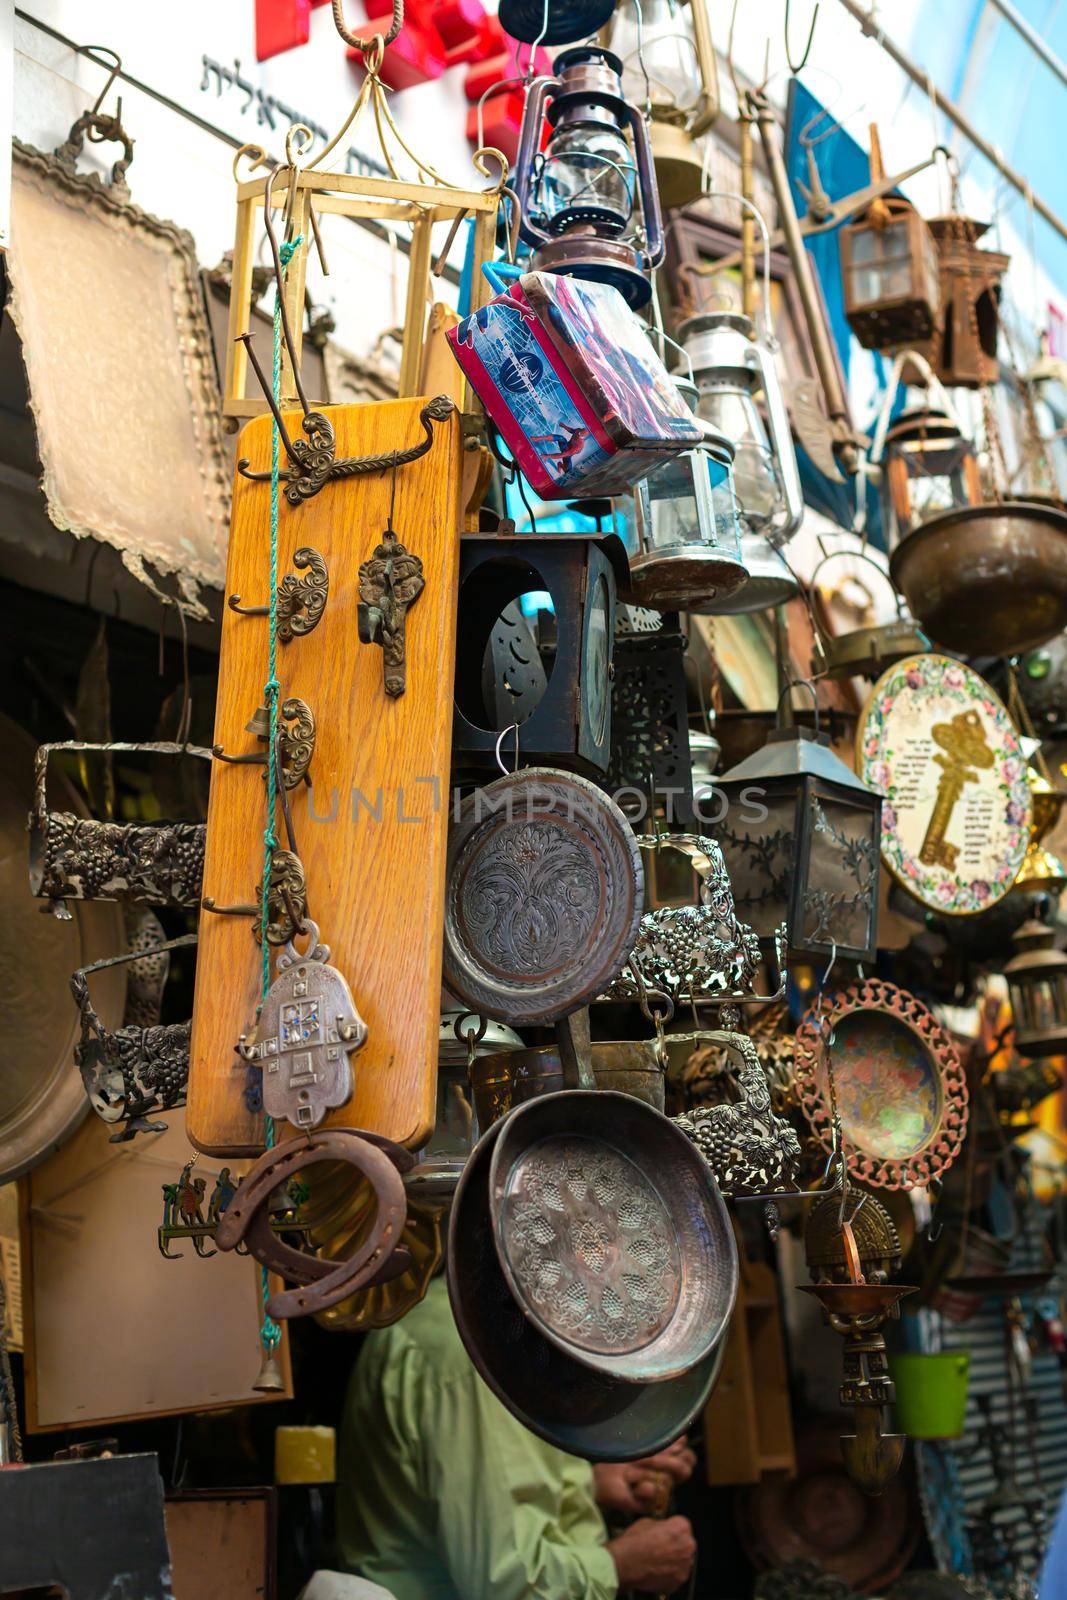 Street market of souvenirs and antiques in Israel by Try_my_best